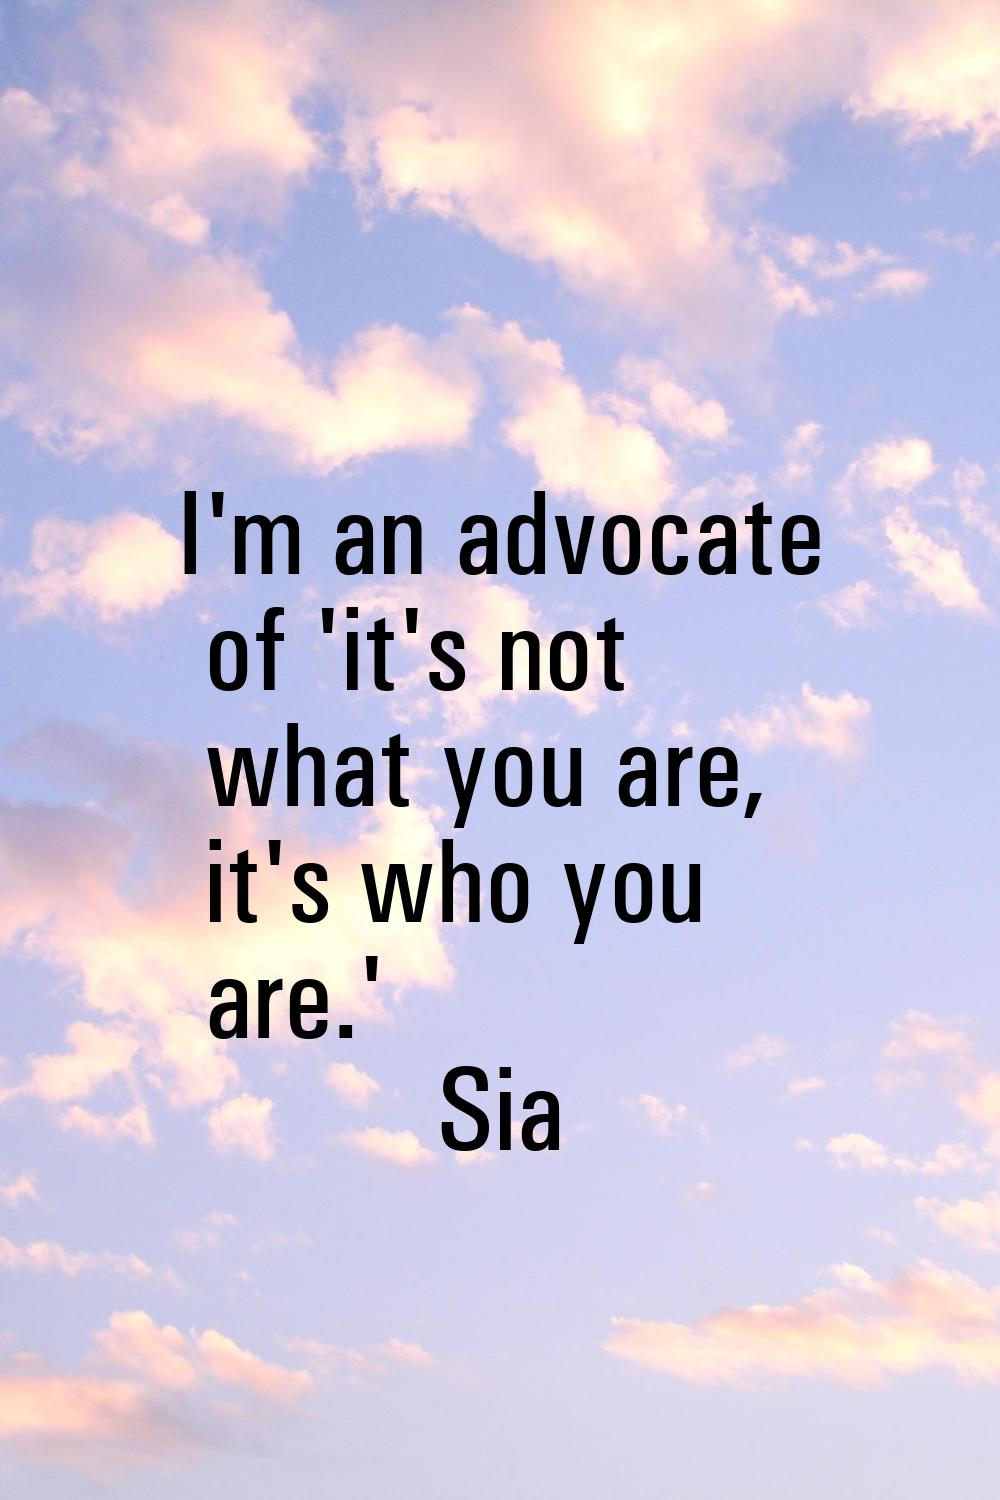 I'm an advocate of 'it's not what you are, it's who you are.'